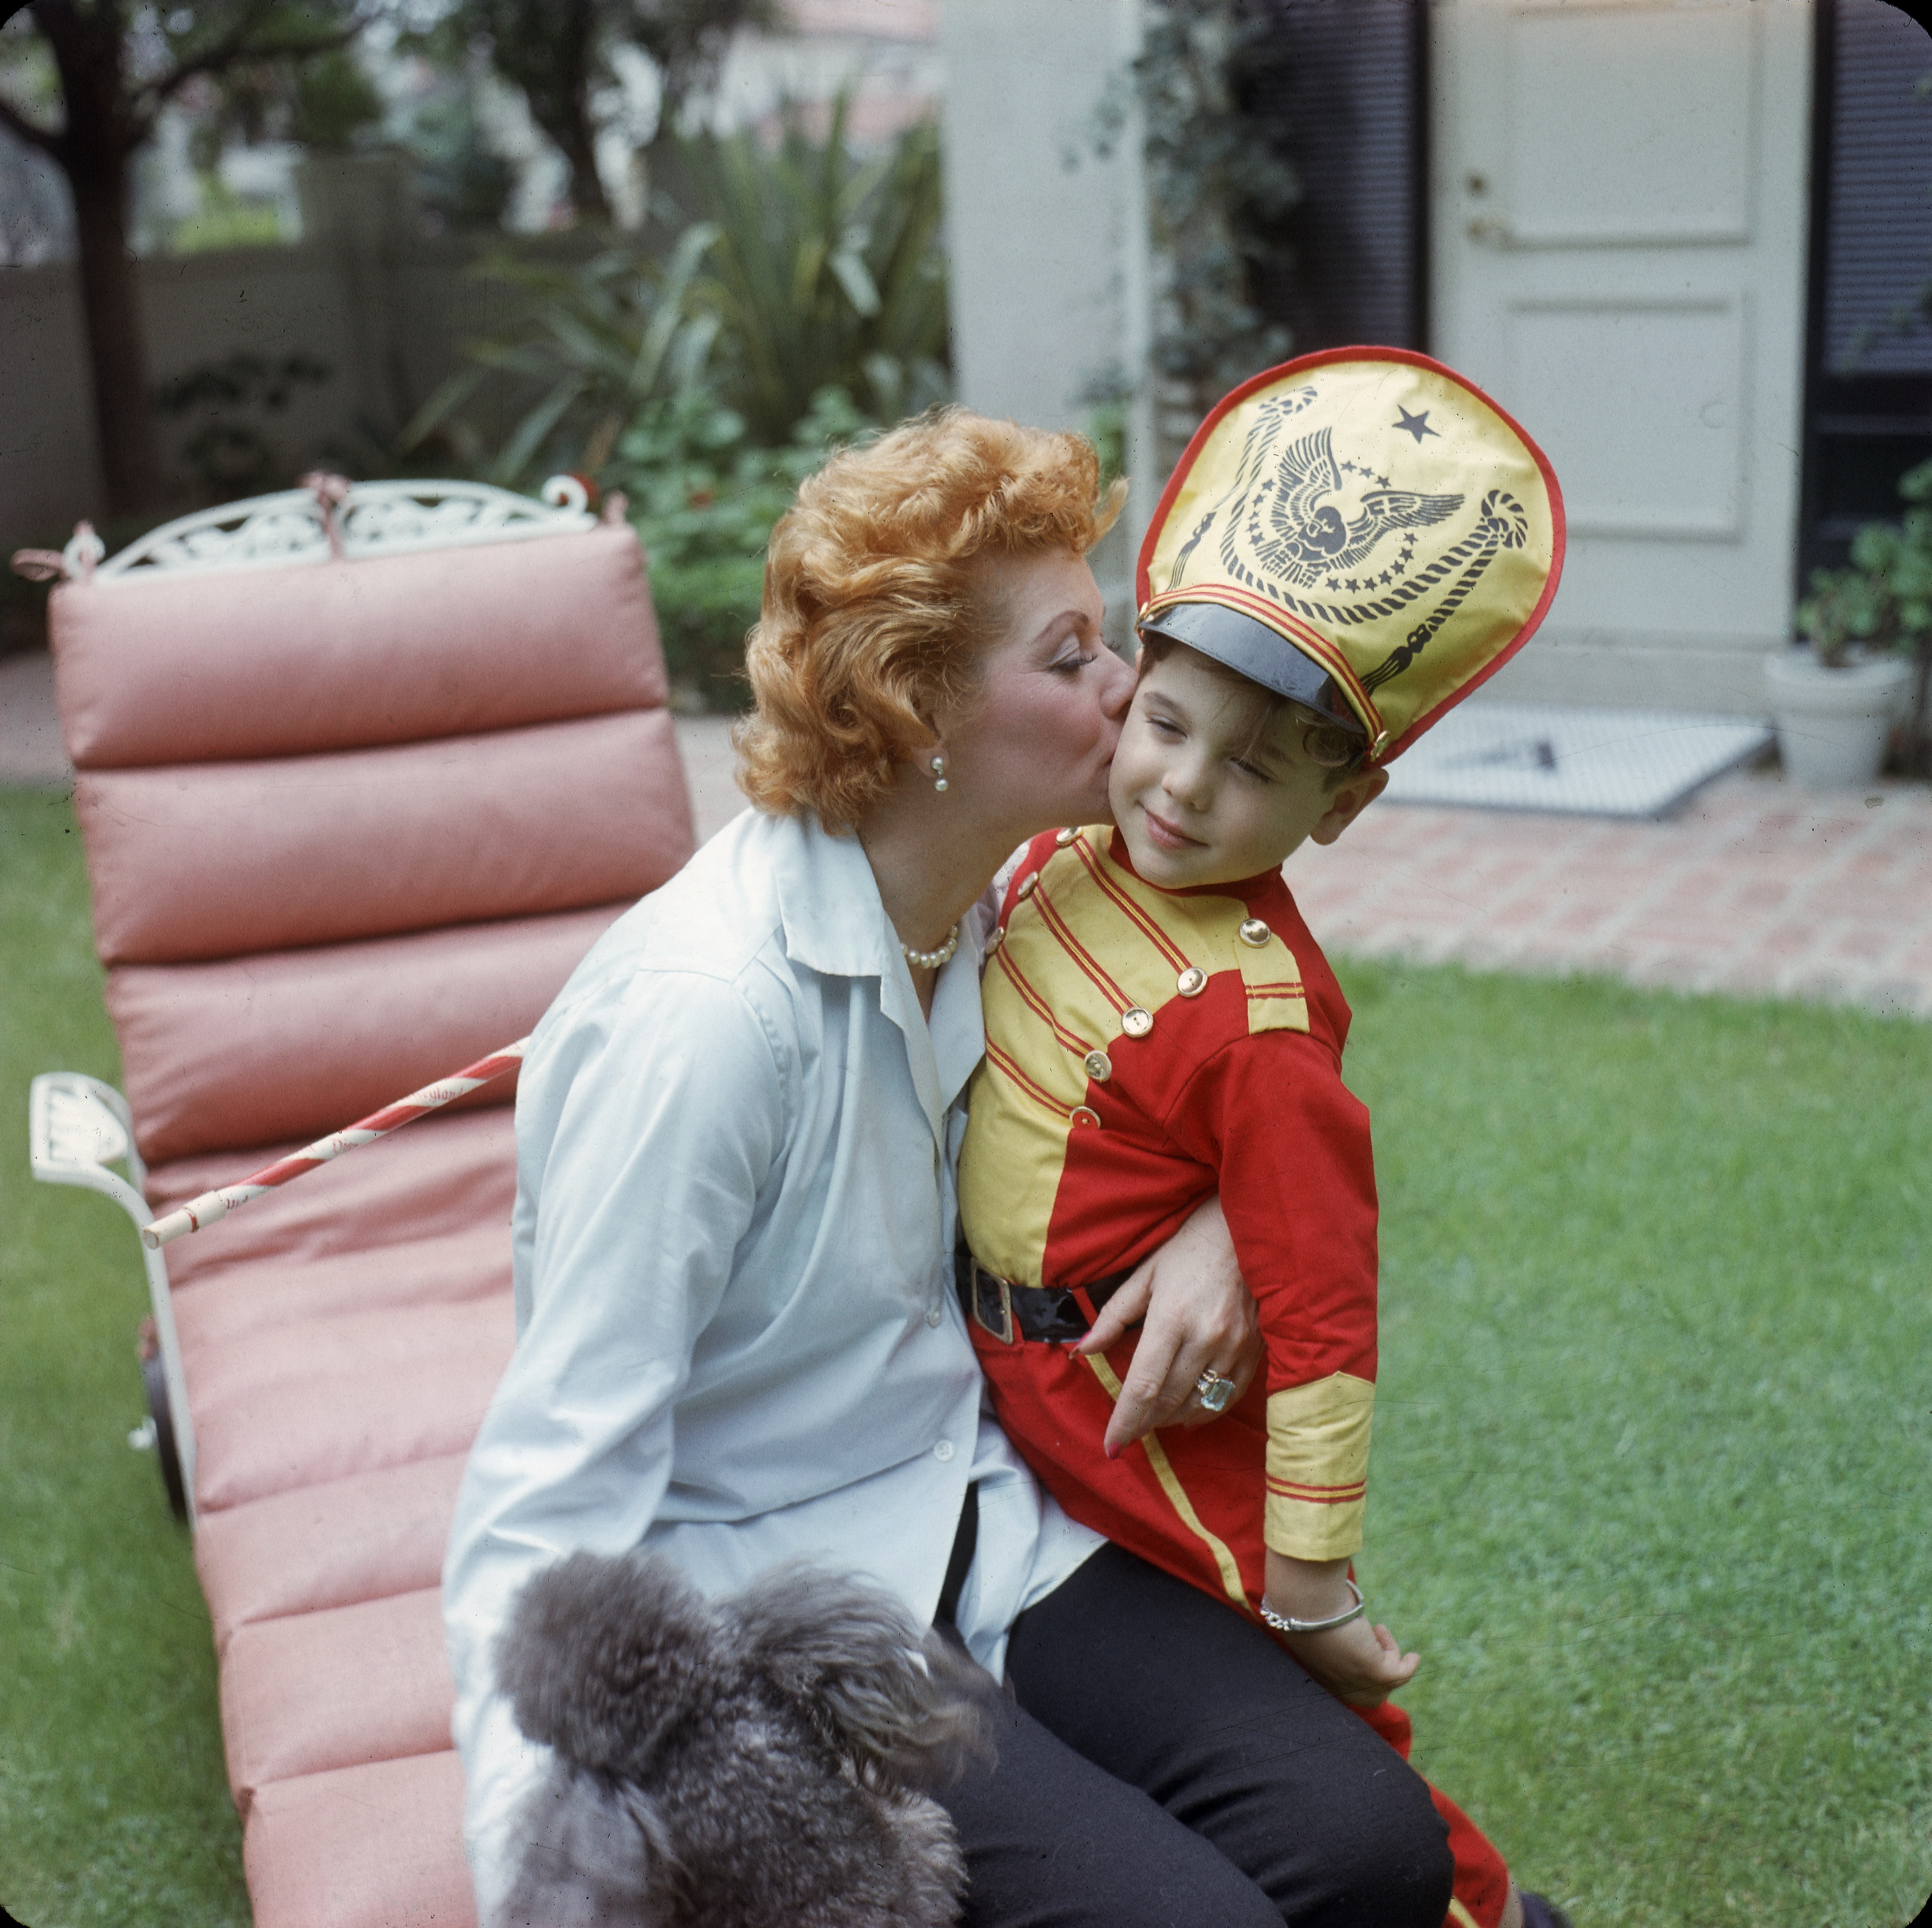 Lucille Ball and Desi Arnaz Jr. in Los Angeles, California, circa 1950 | Source: Getty Images